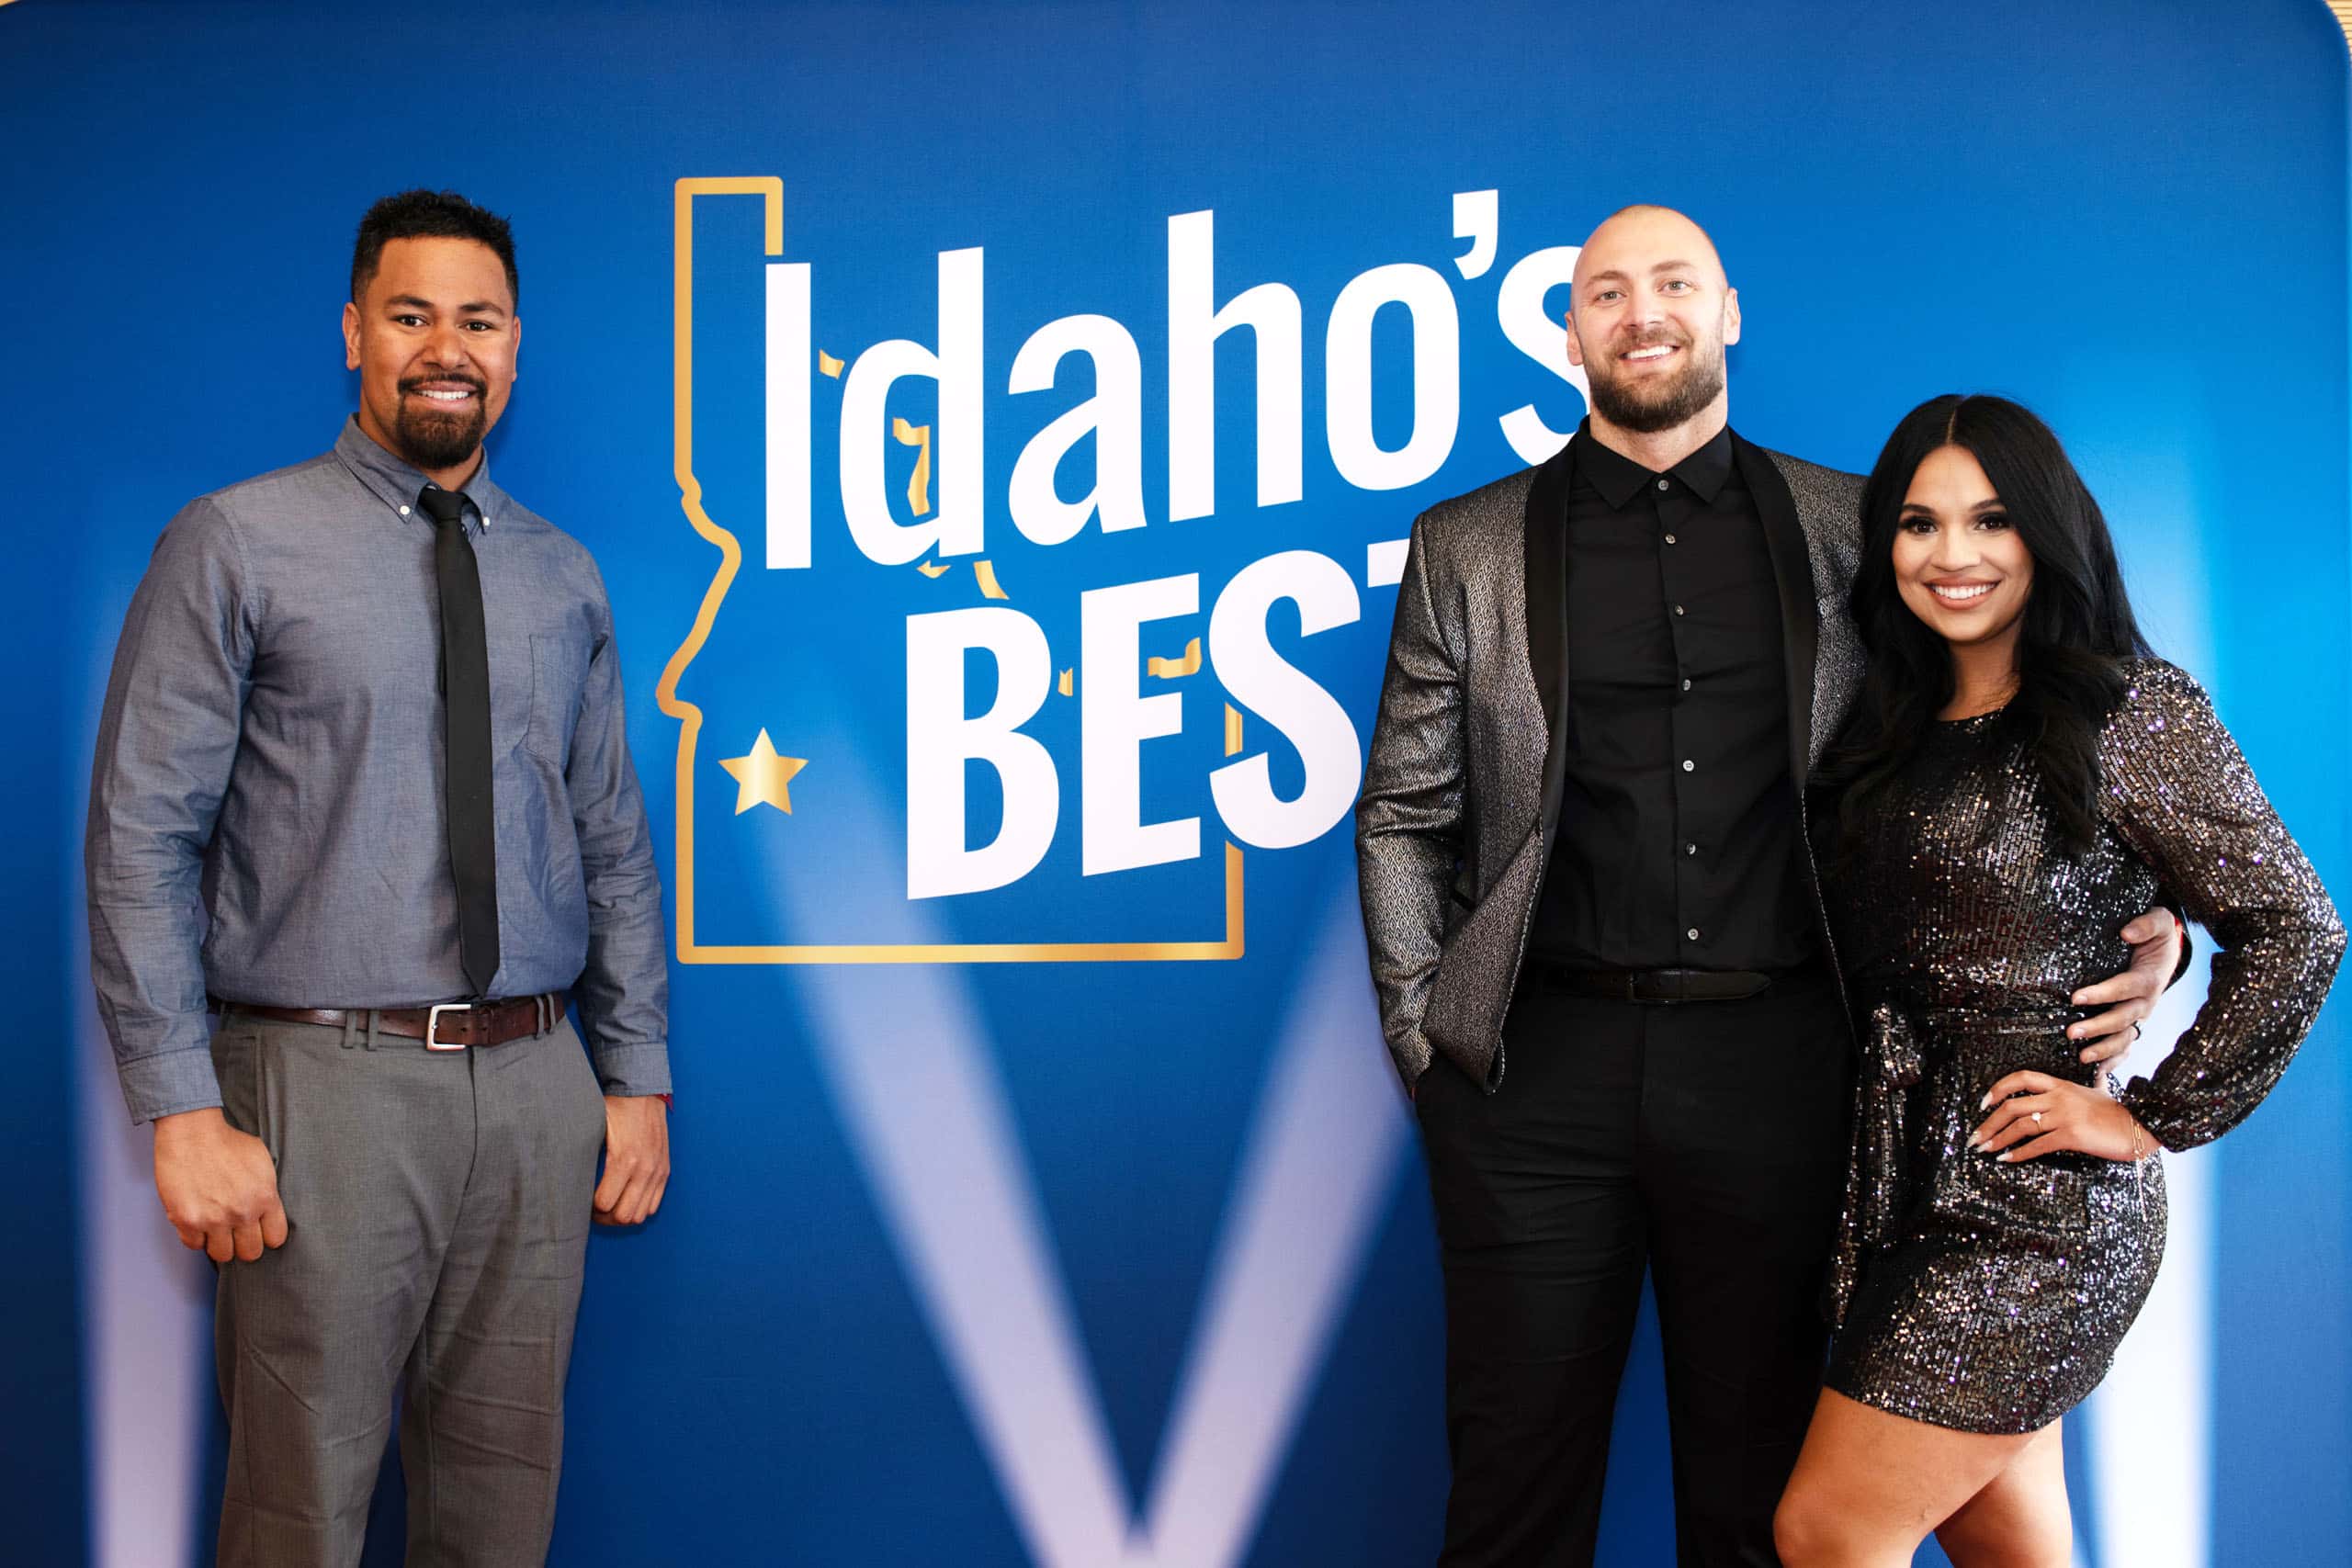 Local Business Recognized as Idaho’s Best